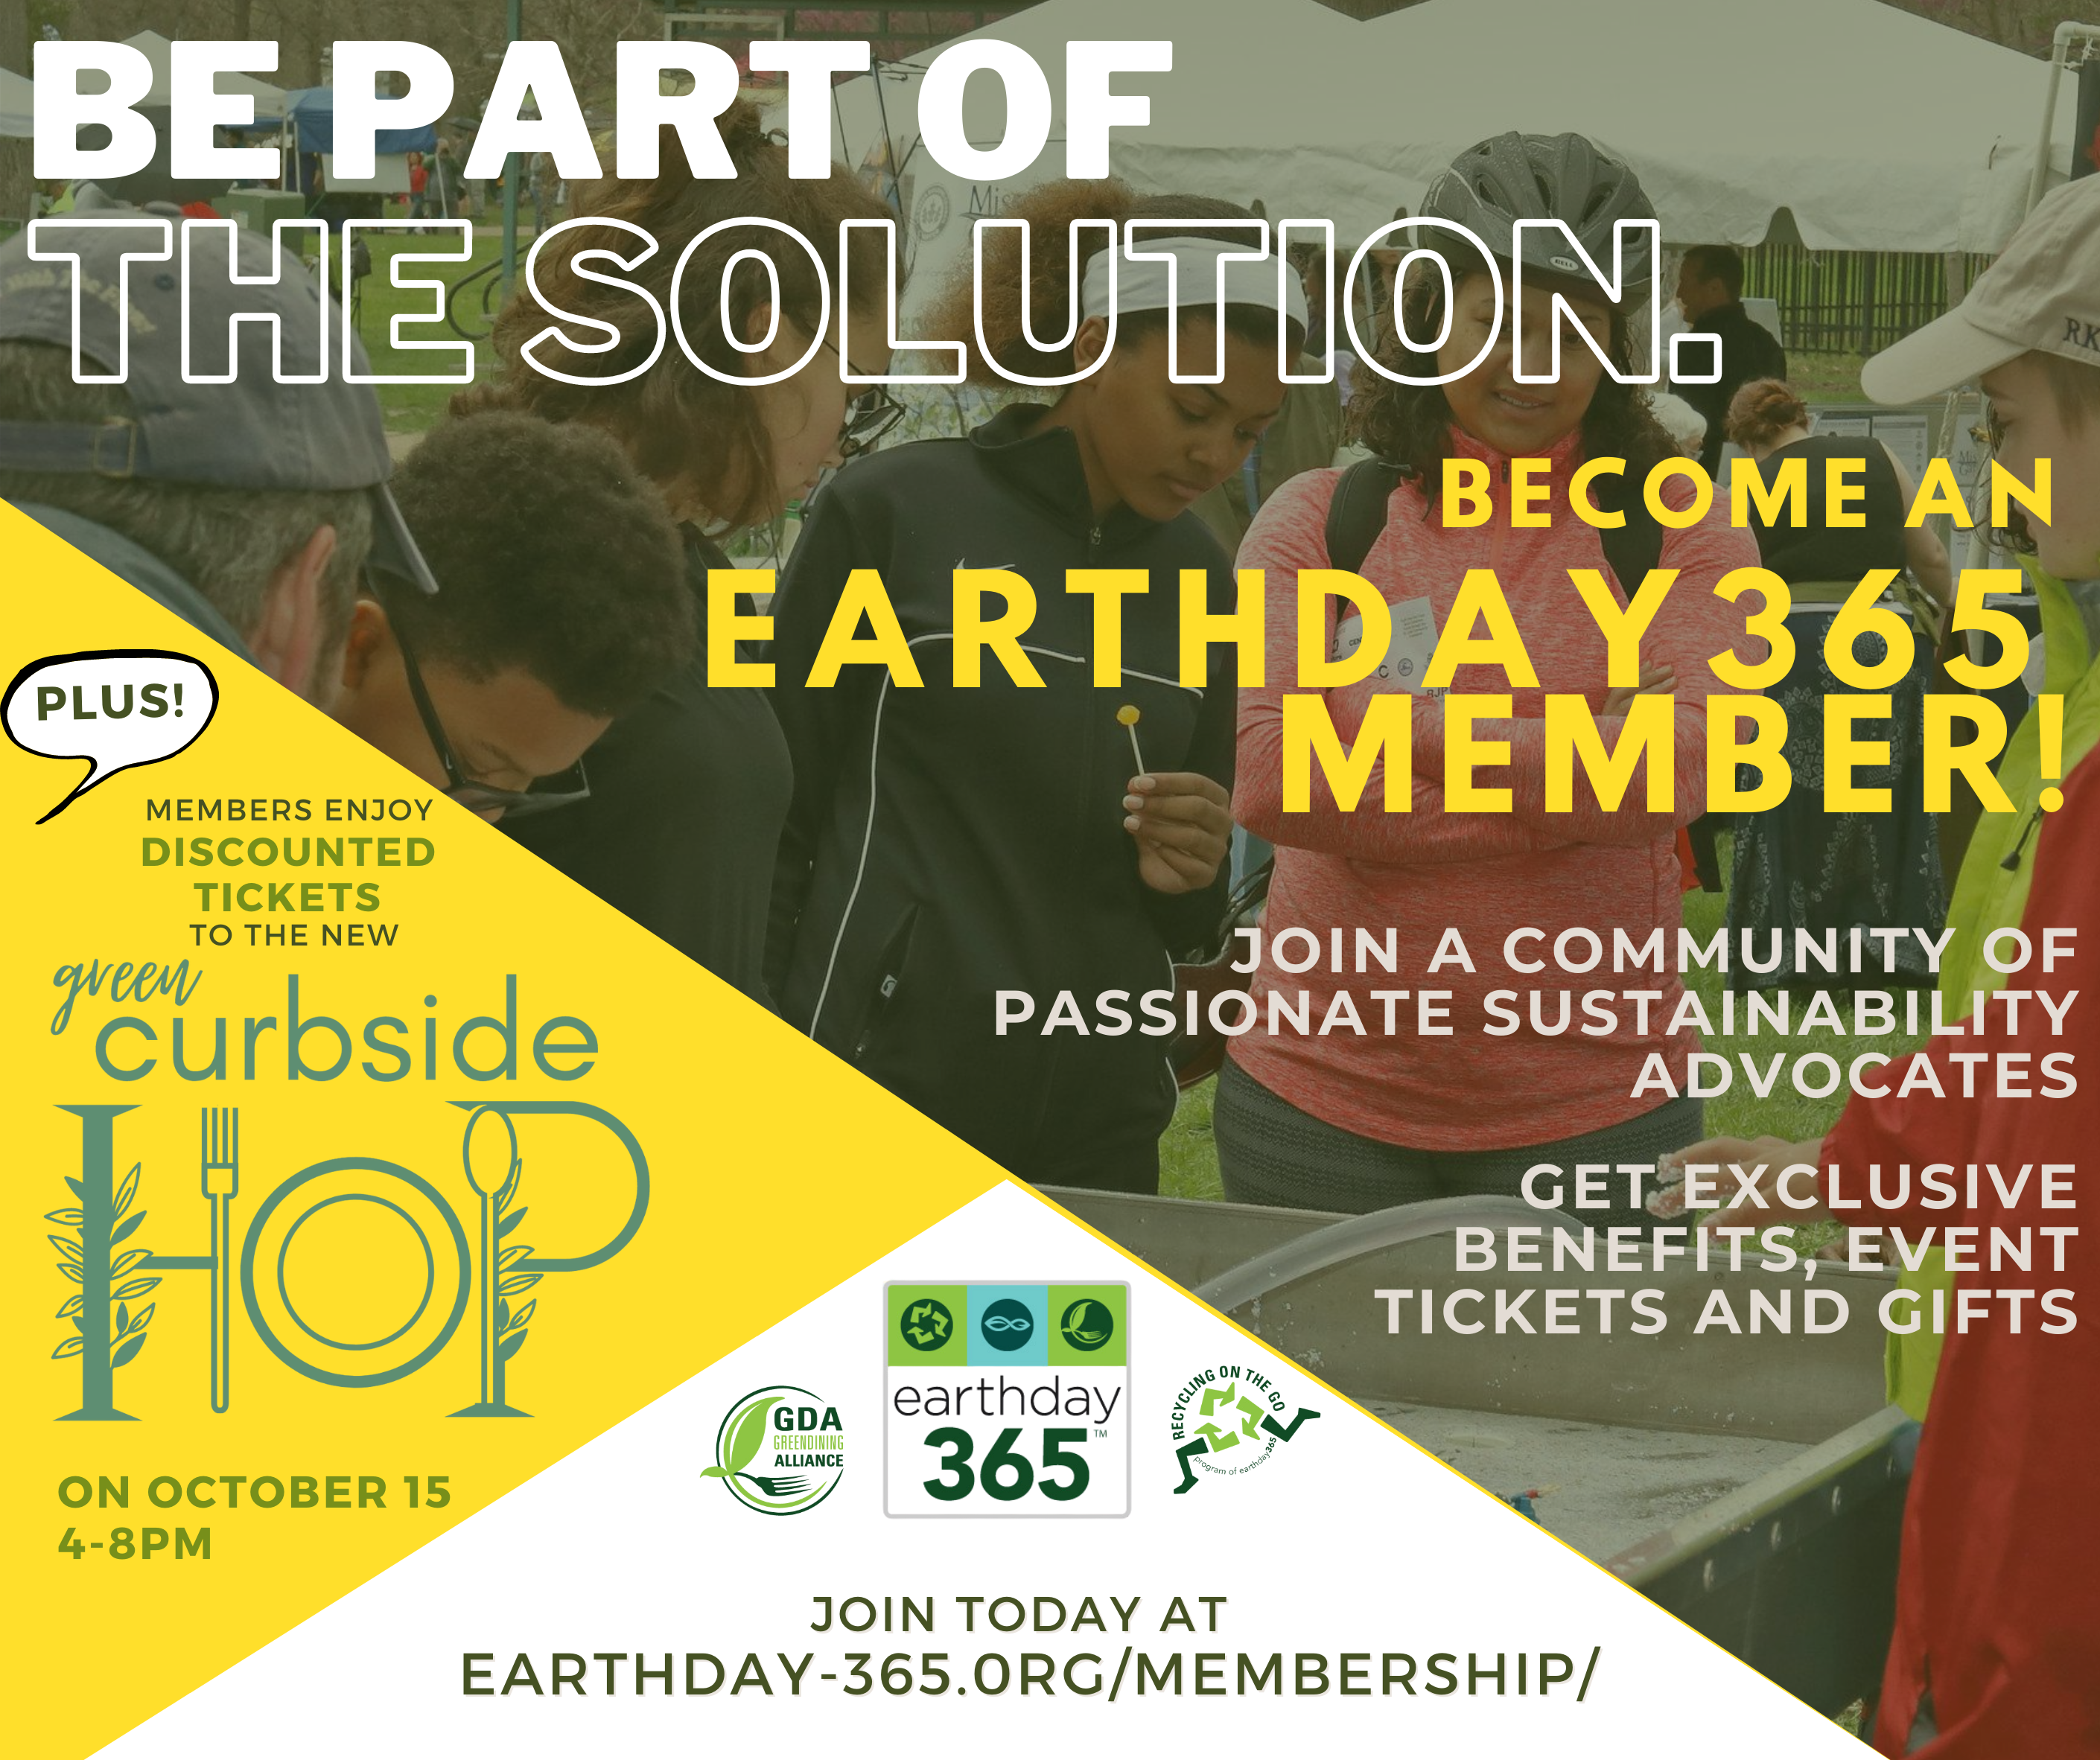 Be Part of the Solution - become an earthday365 member. Green Curbside Hop tickets on sale.